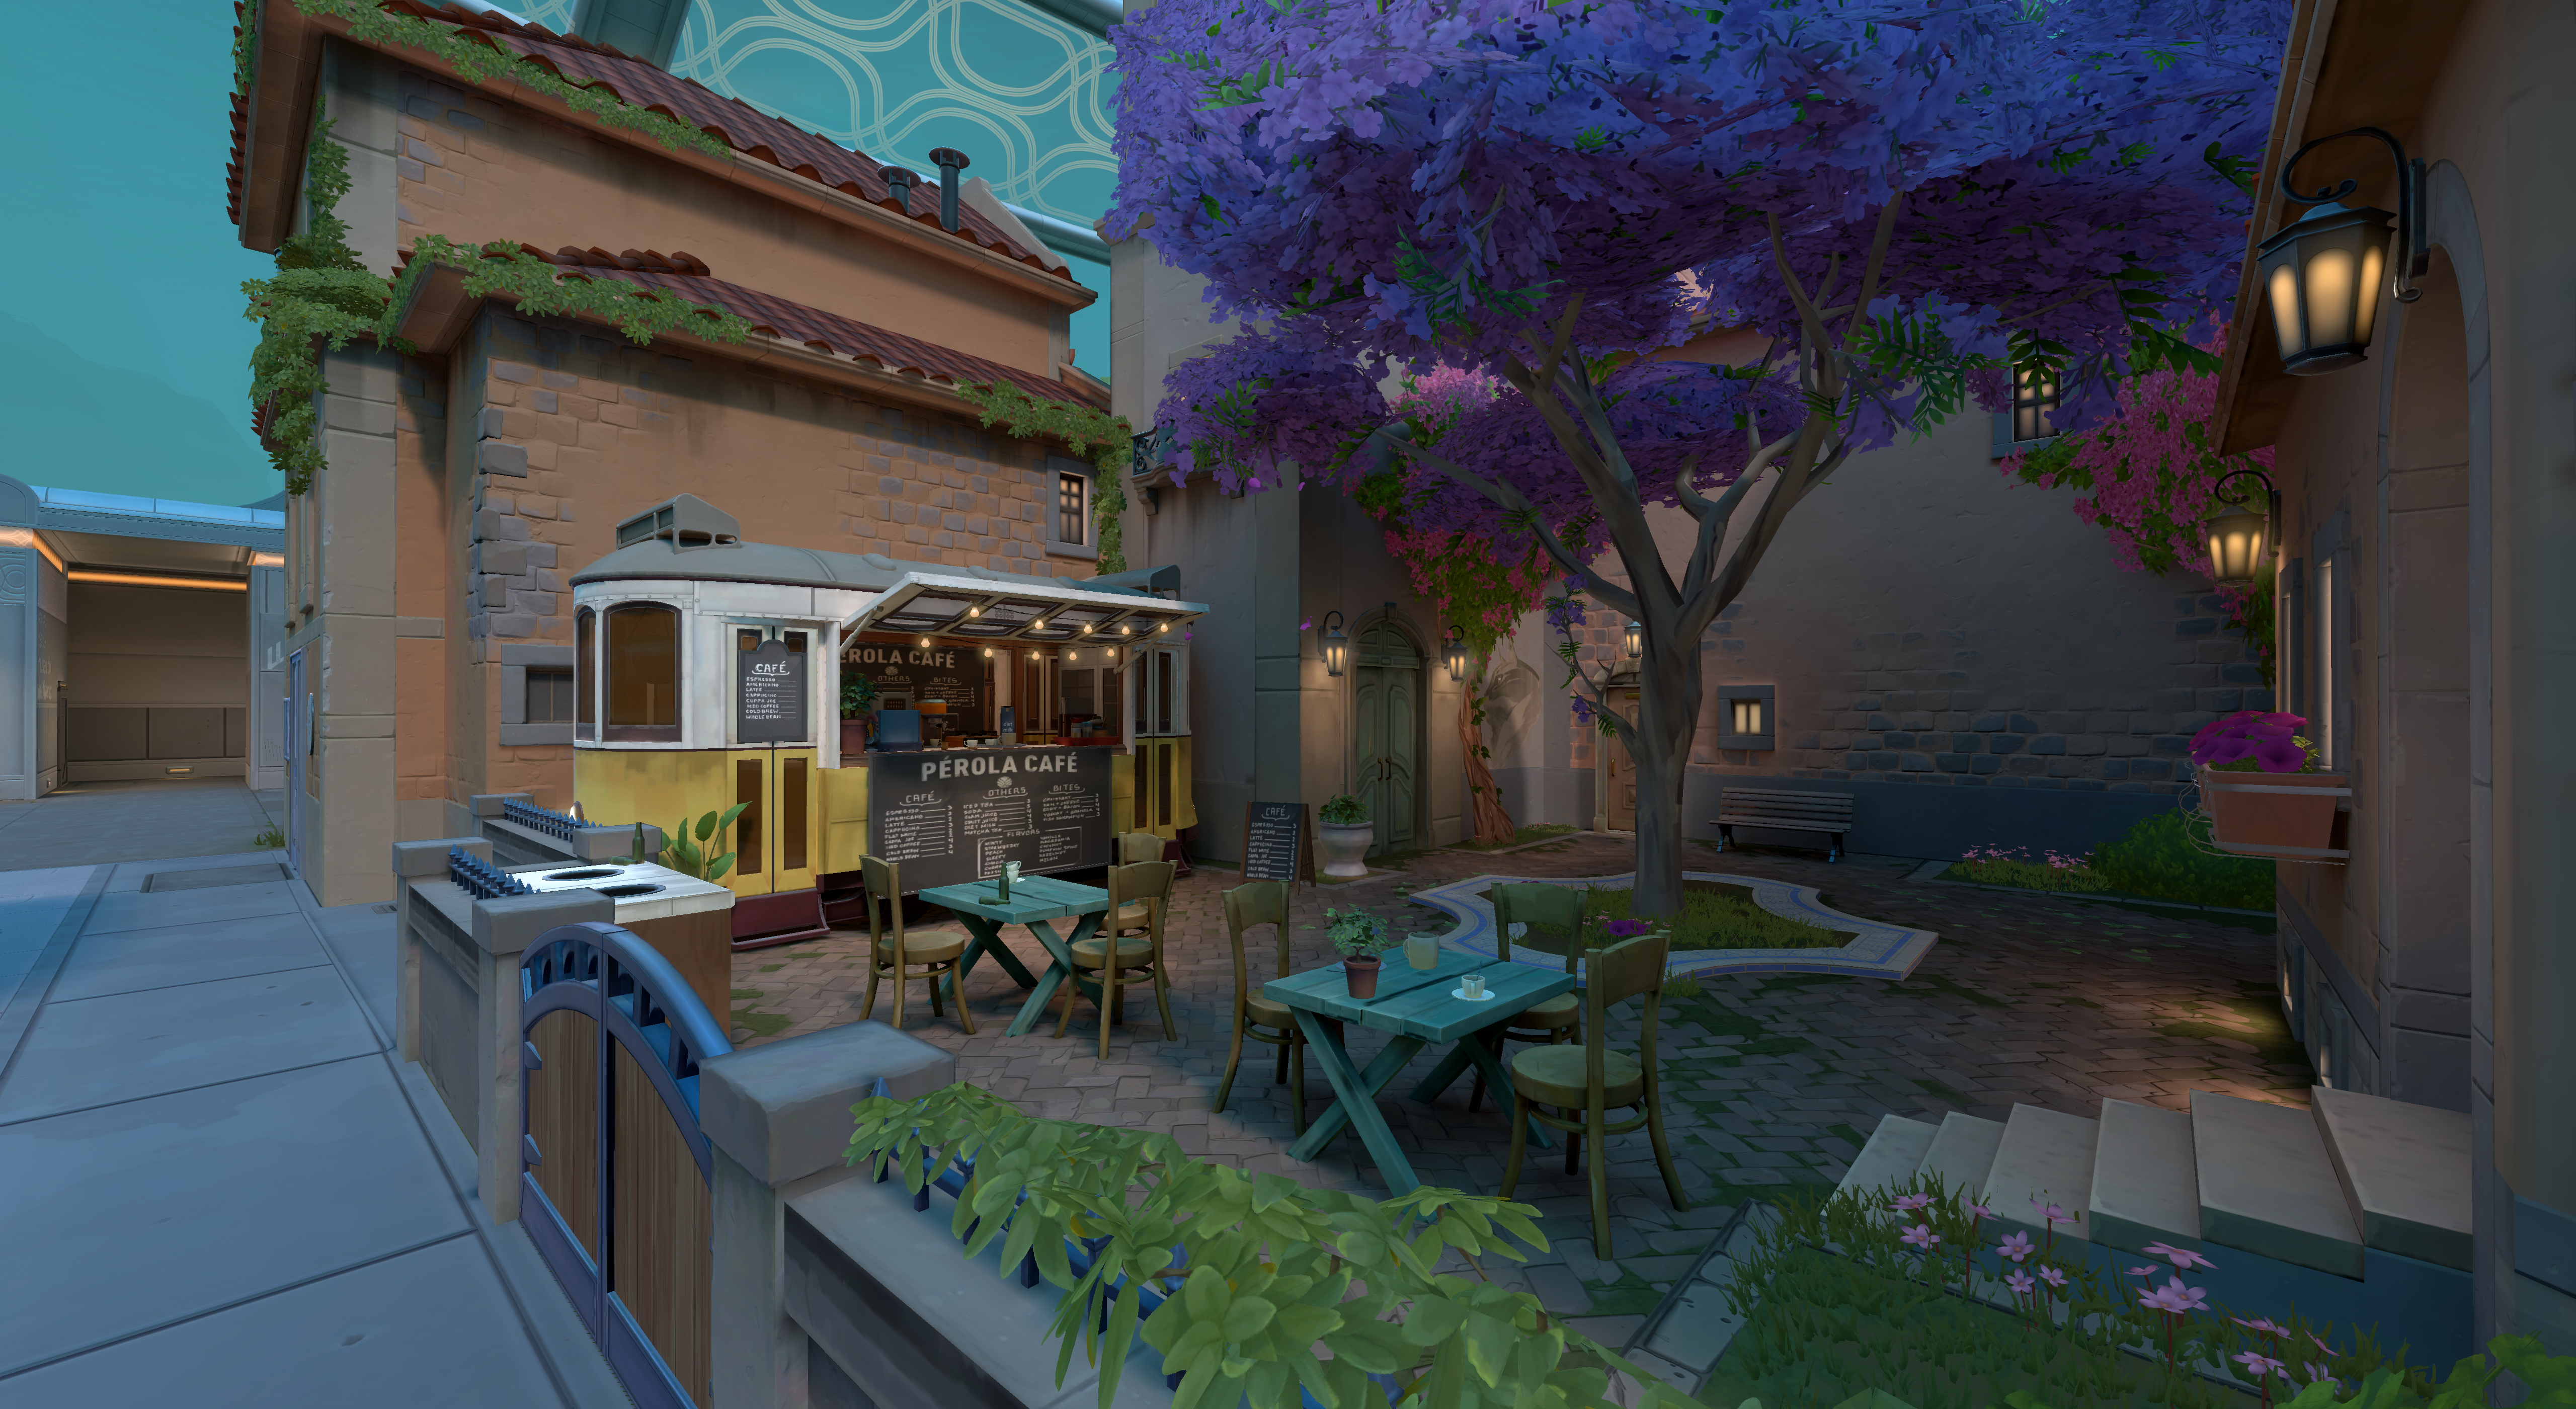 One side of new Valorant map, PEARL, is shown, and a cafe with chairs, tables, and blossoming trees can be seen.